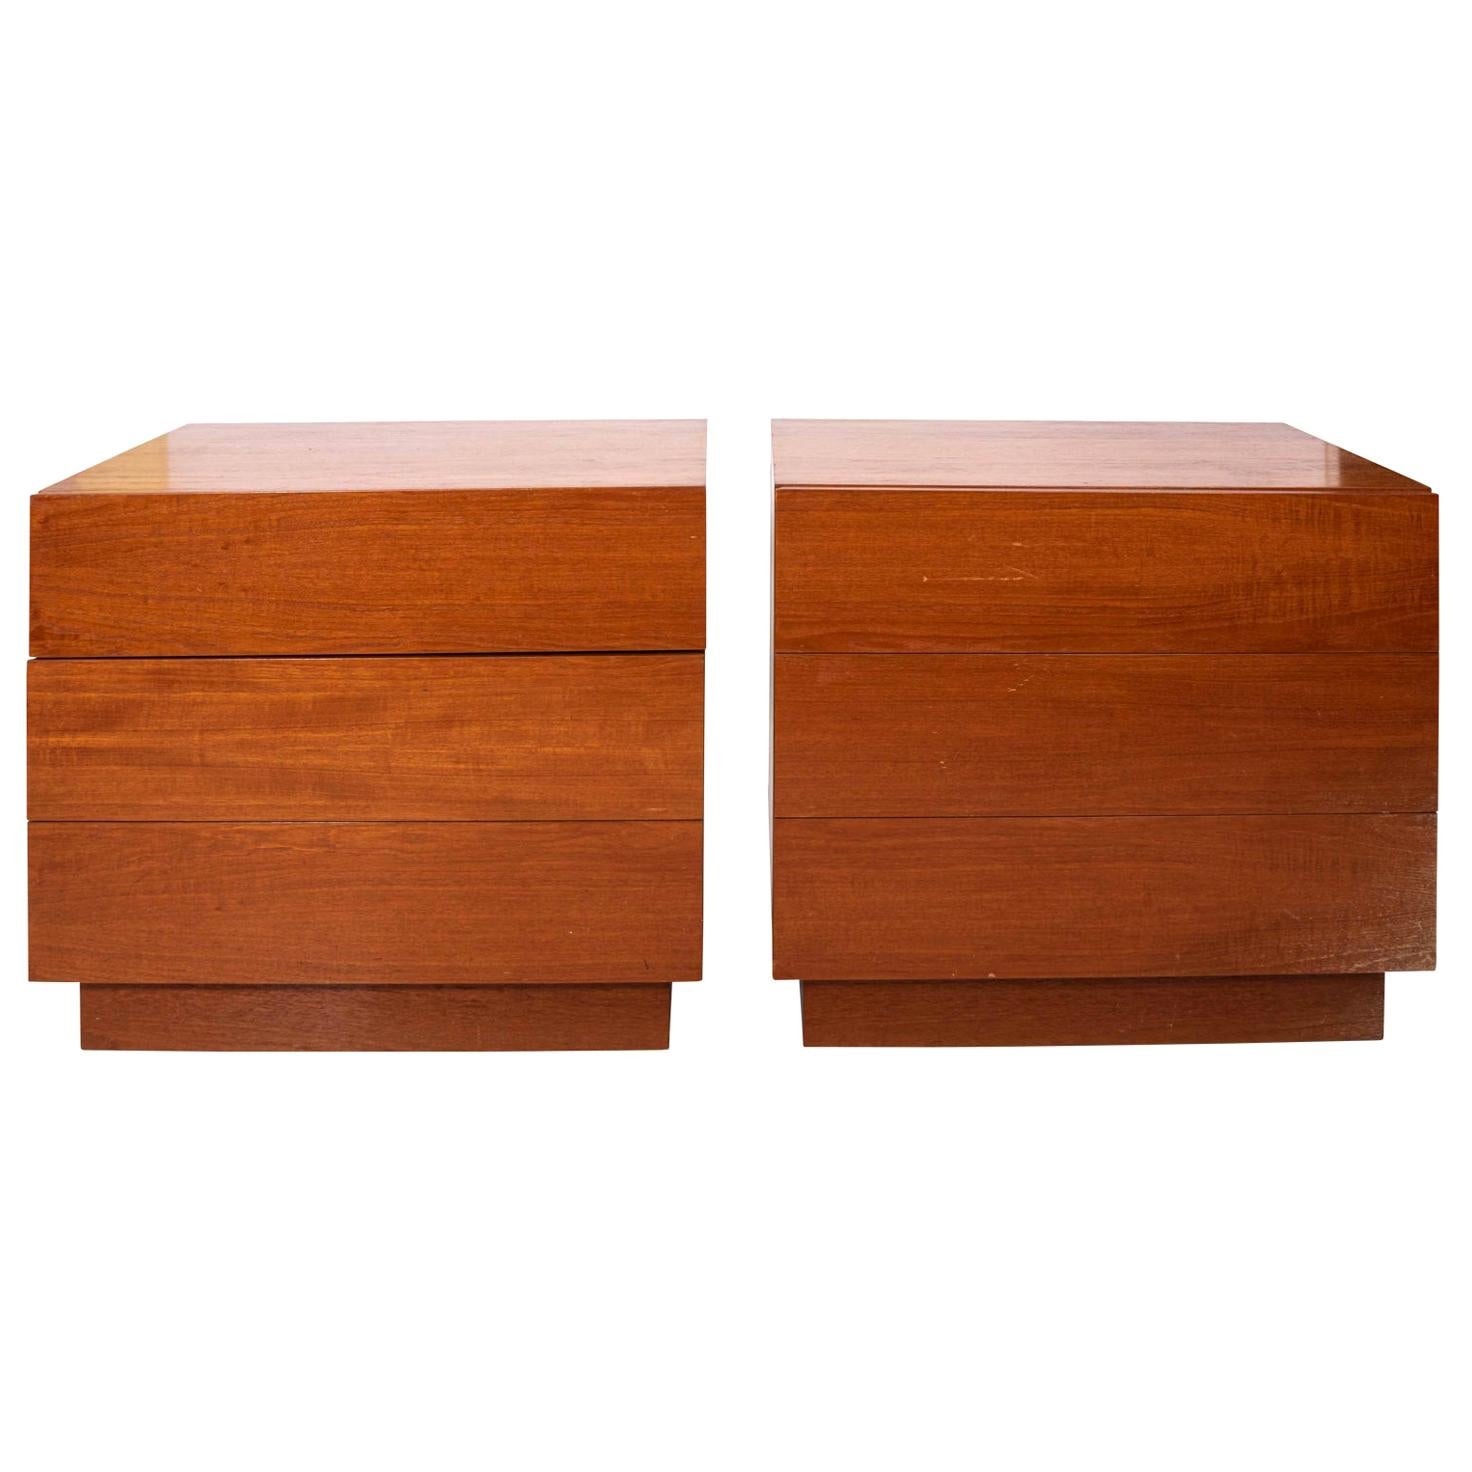 Pair of Stained Birch Bachelor's Chests